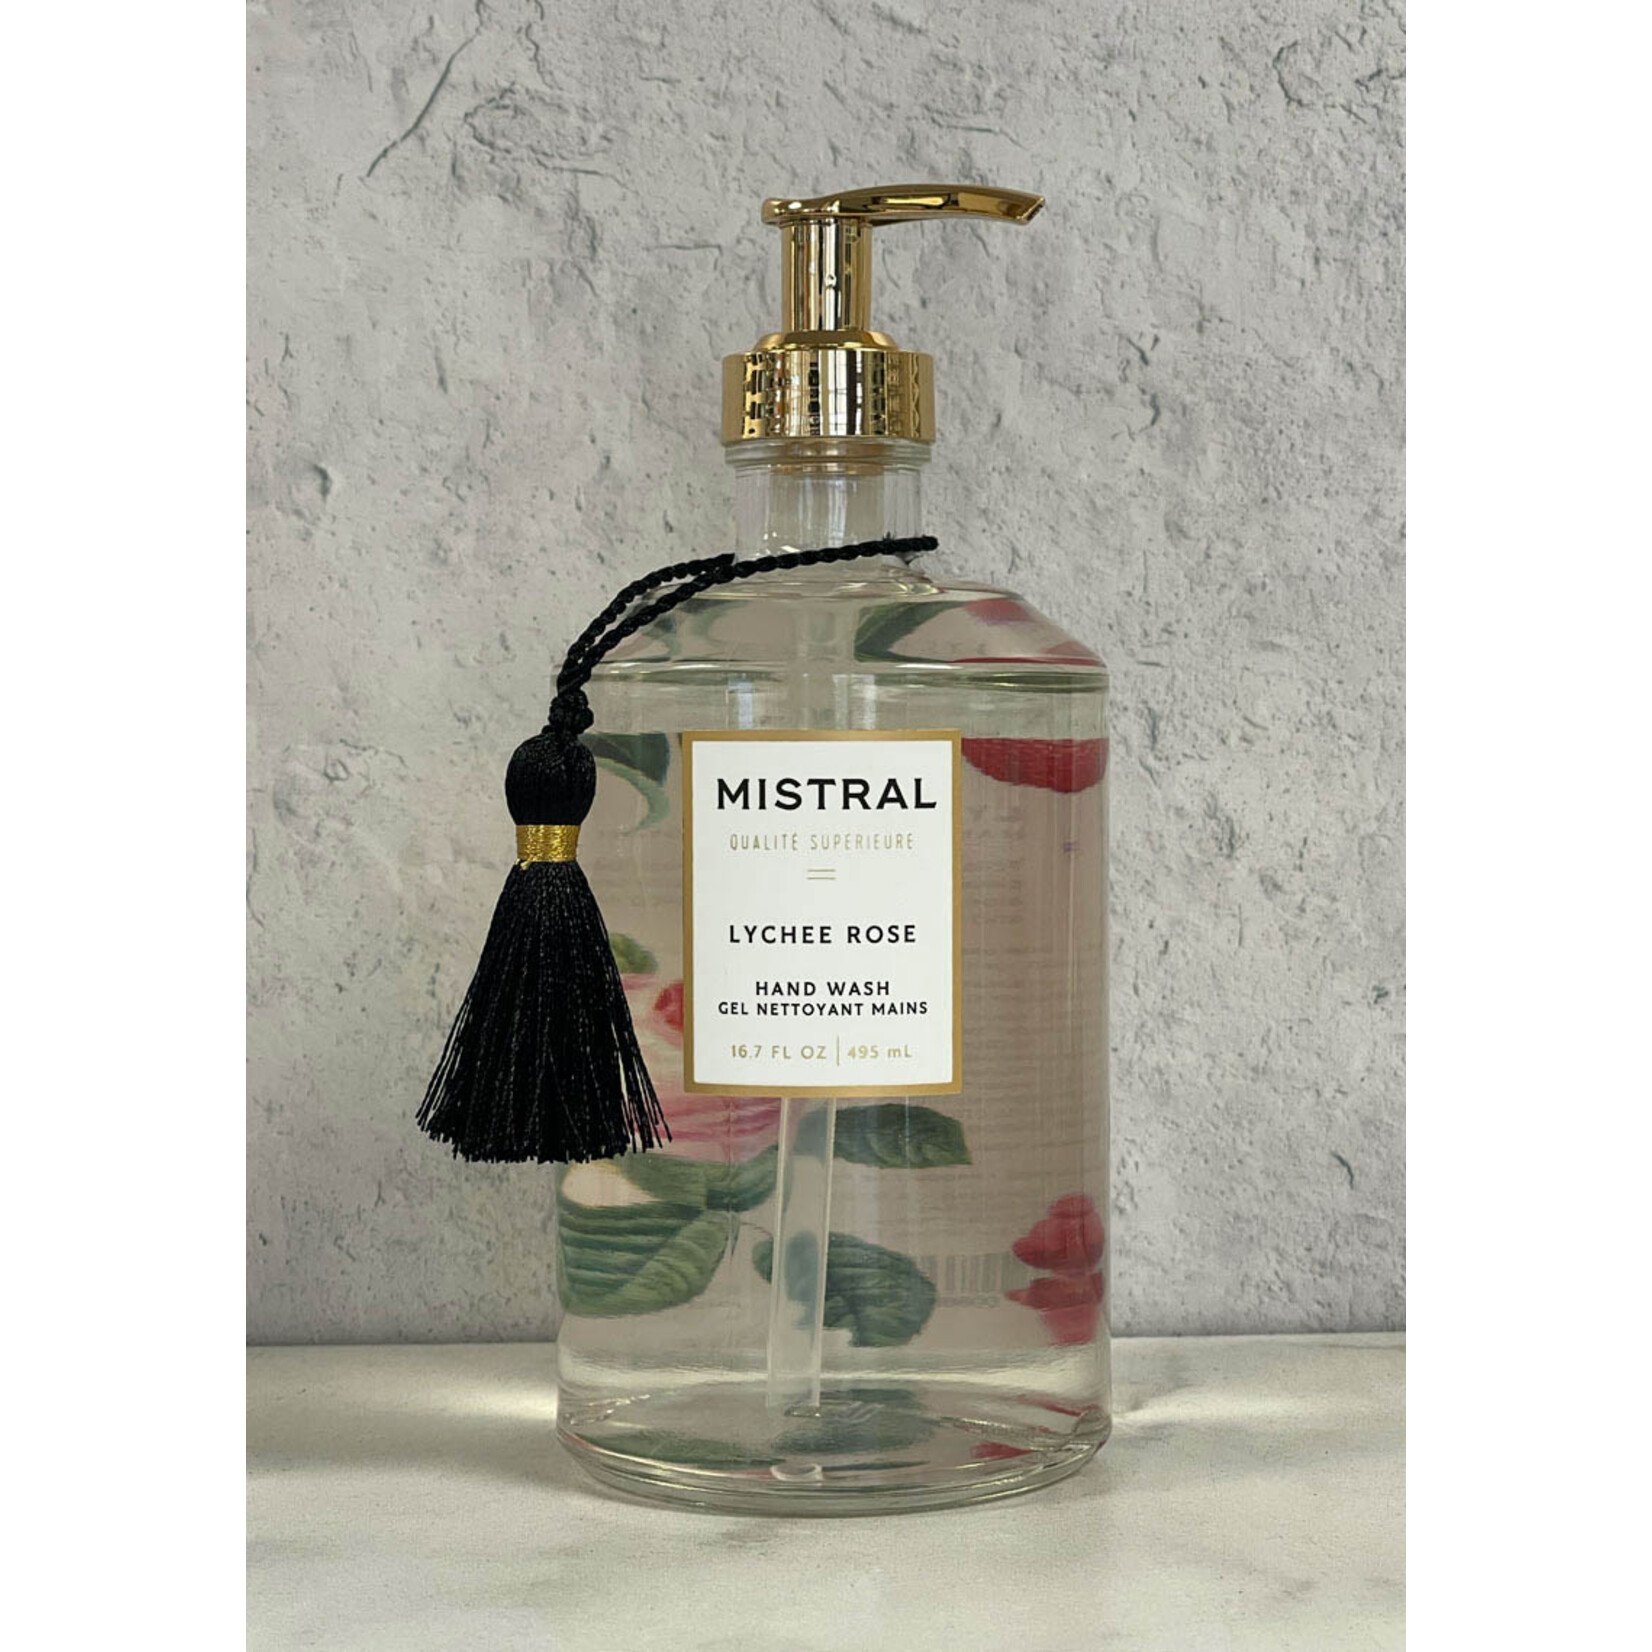 Mistral Luxe Handwash in Lychee Rose